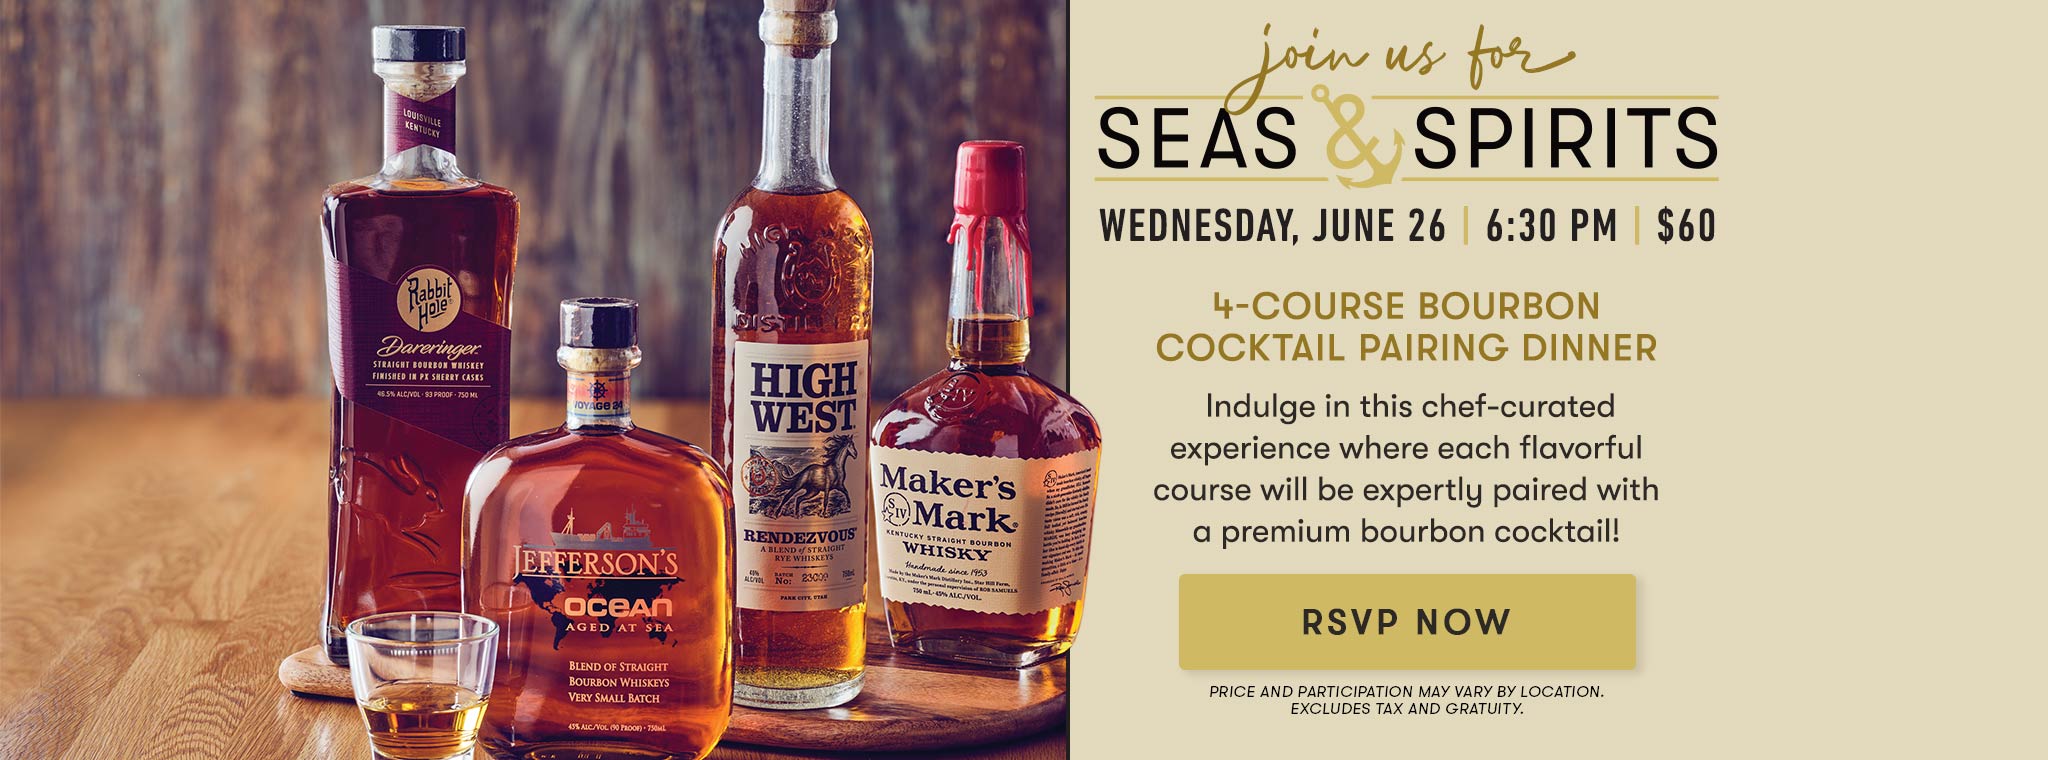 Join us for Seas & Spirits Wednesday, June 26 6:30PM $60* - 4-Course Bourbon Cocktail Pairing Dinner